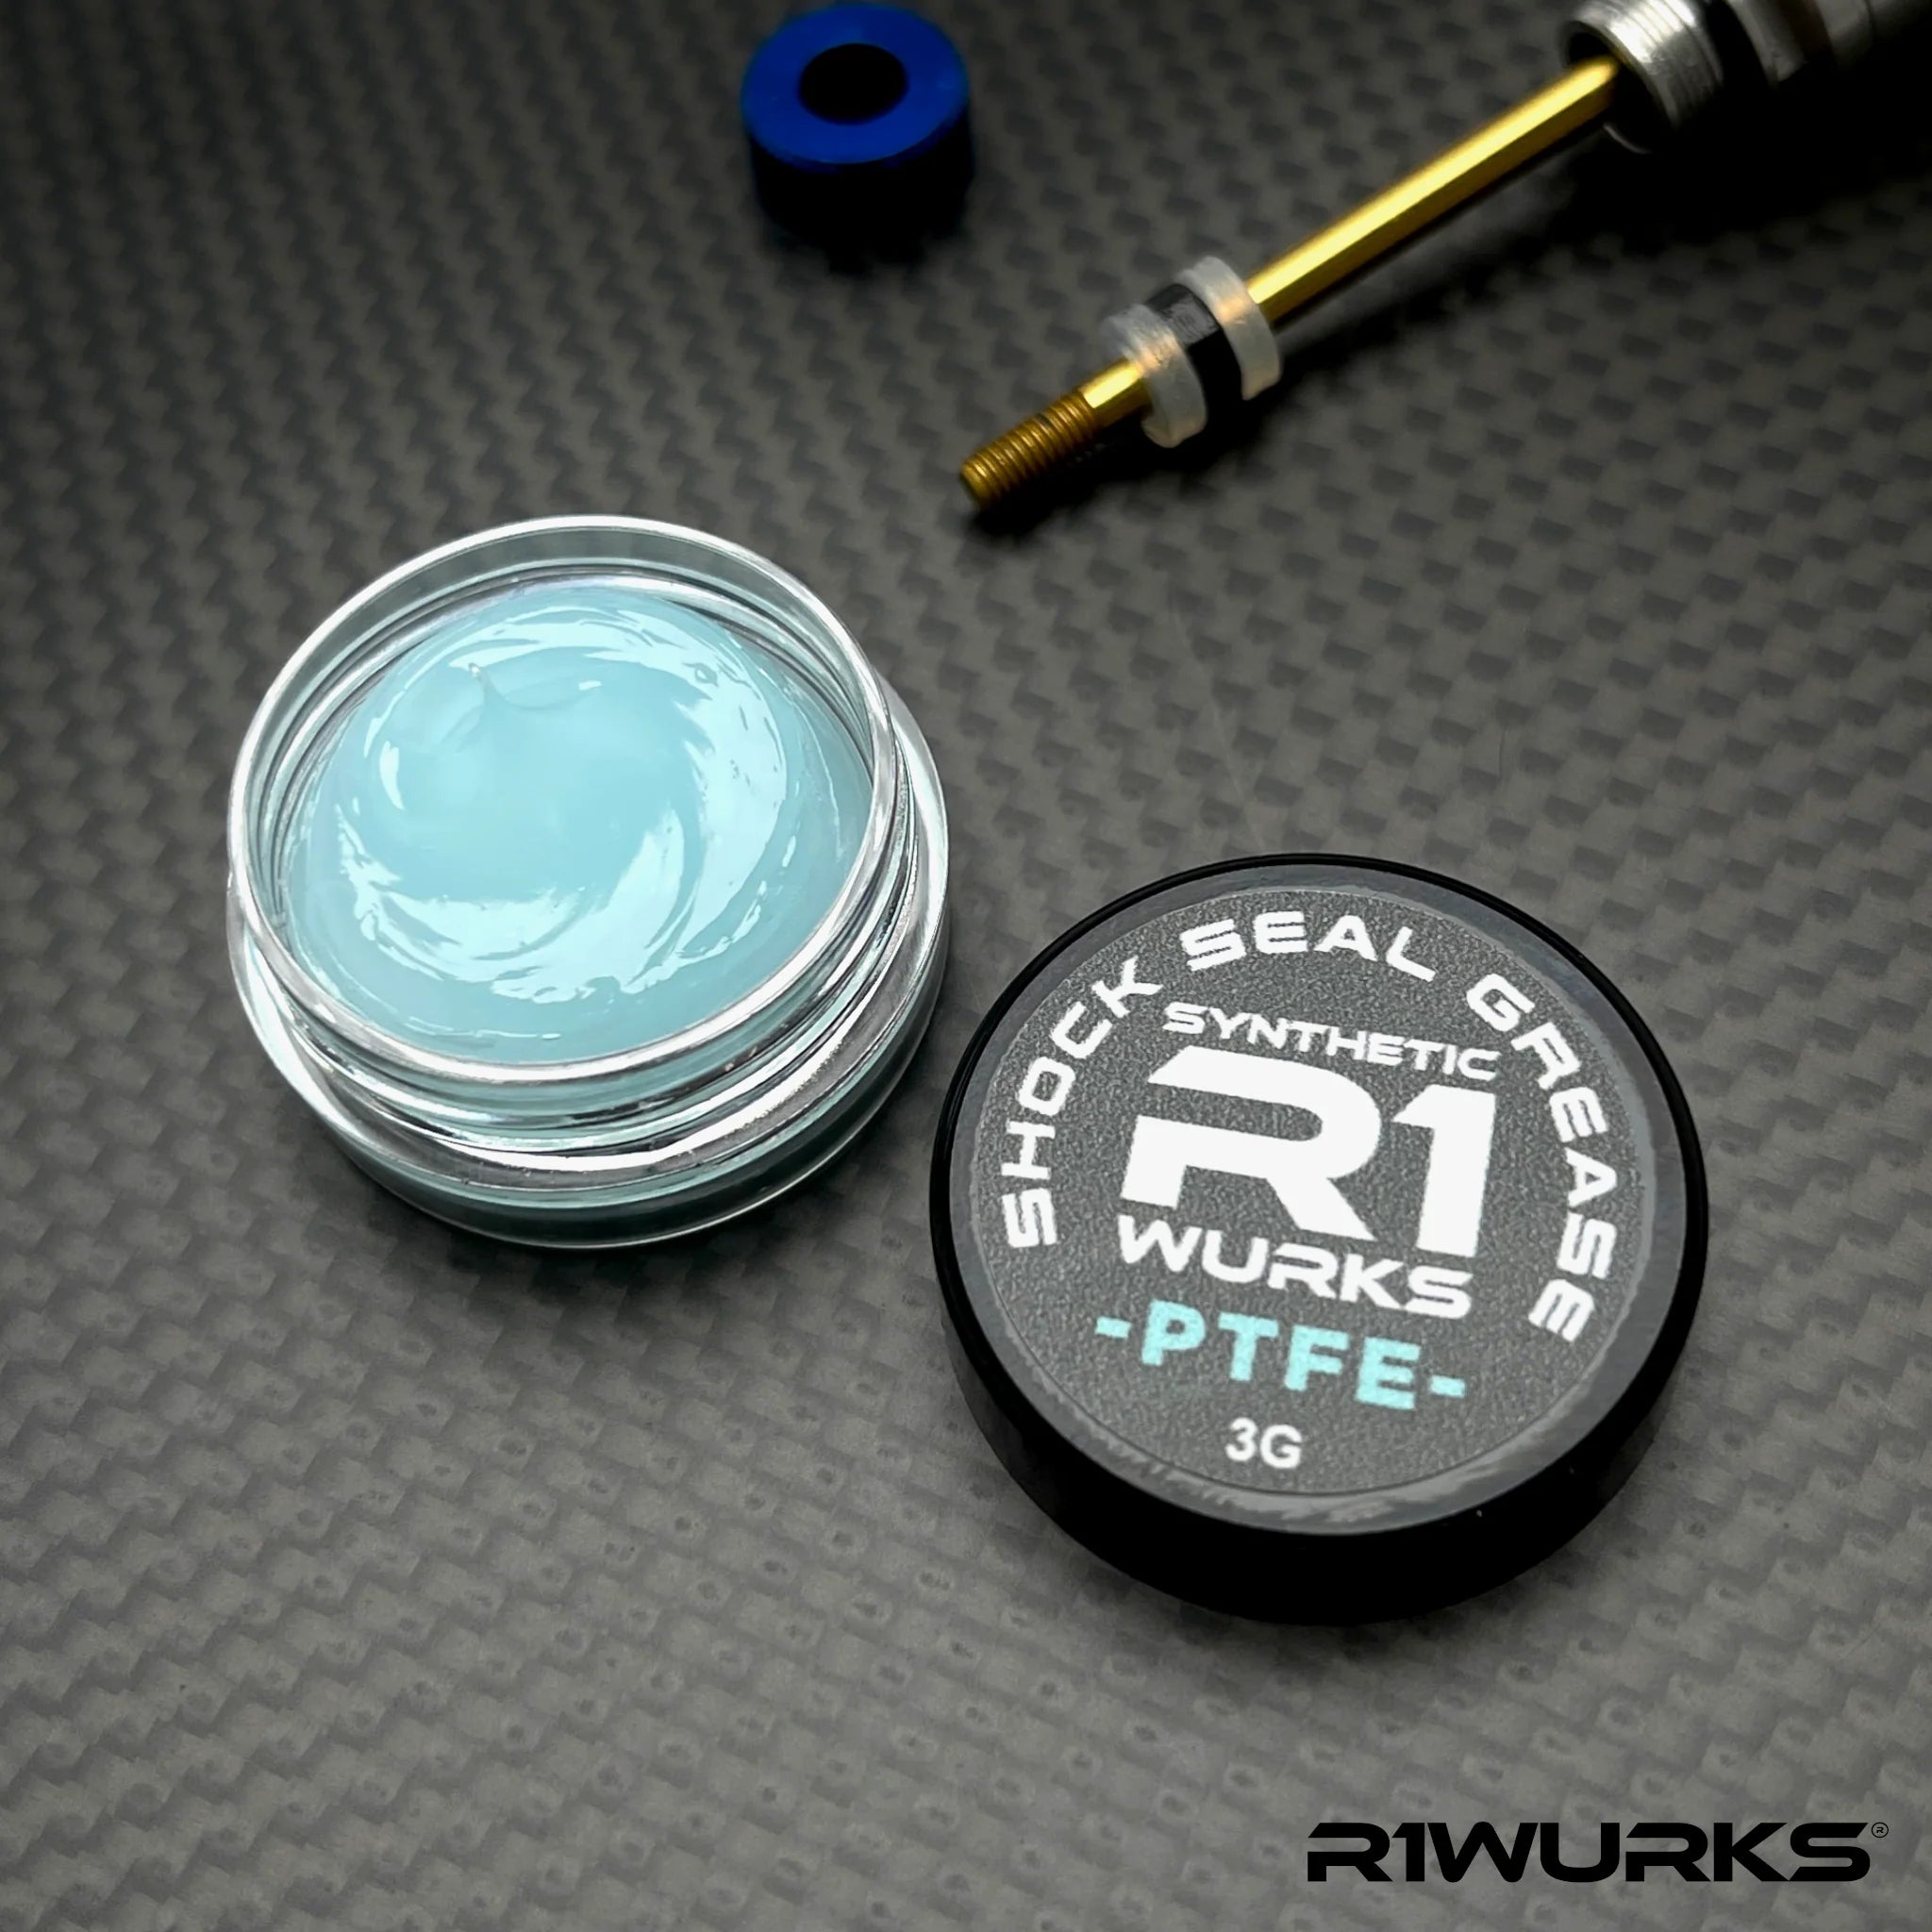 R1 Wurks 900034 PTFE Shock Seal Grease (3g)